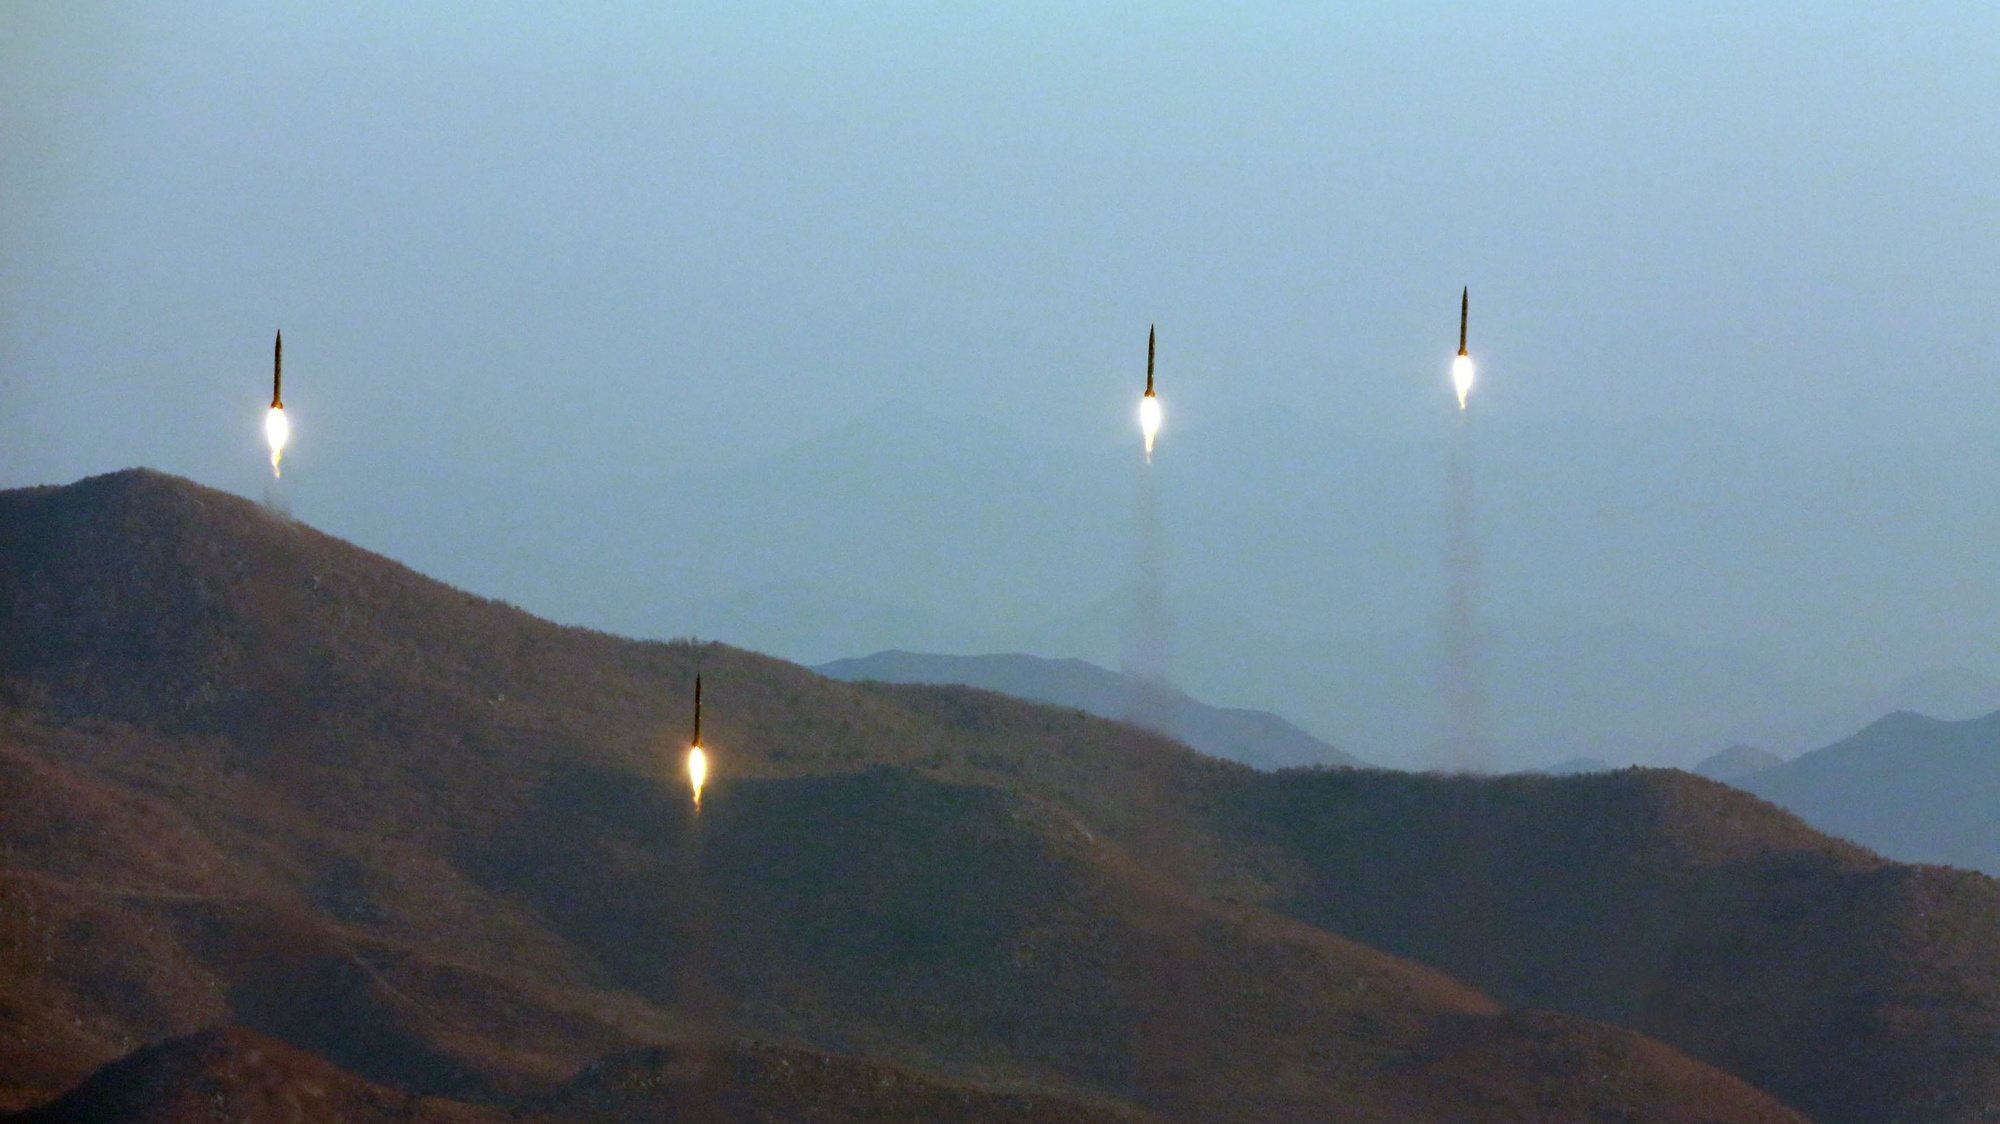 epa06163494 (FILE) - An undated photo made available by the North Korean Central News Agency (KCNA), the state news agency of North Korea, on 07 March 2017, shows four projectiles during a ballistic rocket launching drill of Hwasong artillery units of the Strategic Force of the Korean People&#039;s Army (KPA) at an undisclosed location, North Korea  (reissued 26 August 2017). According to the South Korean military, North Korea has test-fired several short-range unidentified projectiles into the sea from the eastern Kangwon province on 26 August 2017. North Korea has threatened to launch missiles on Guam, where US tactical bombers are based, after it fired a missile landed in Japan&#039;s exclusive economic zone (EEZ), west of Japanese northern island of Hokkaido on 28 July 2017.  EPA/KCNA   EDITORIAL USE ONLY